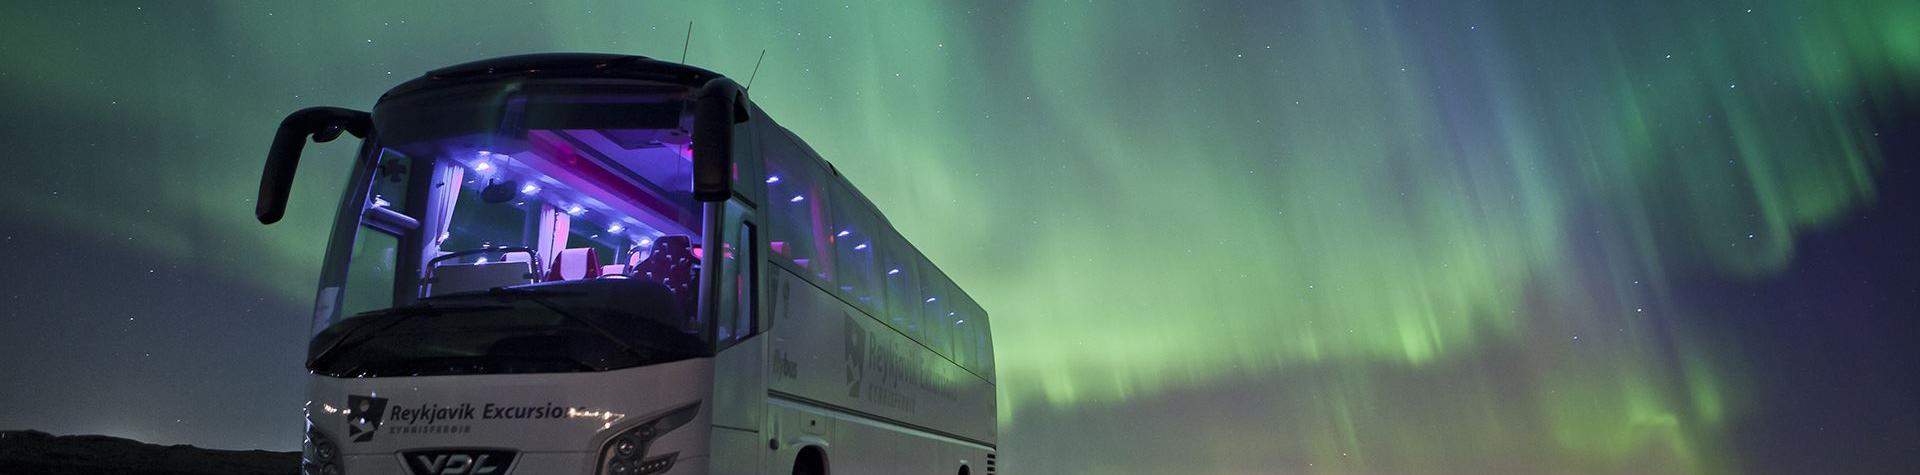 The Northern Lights Tour